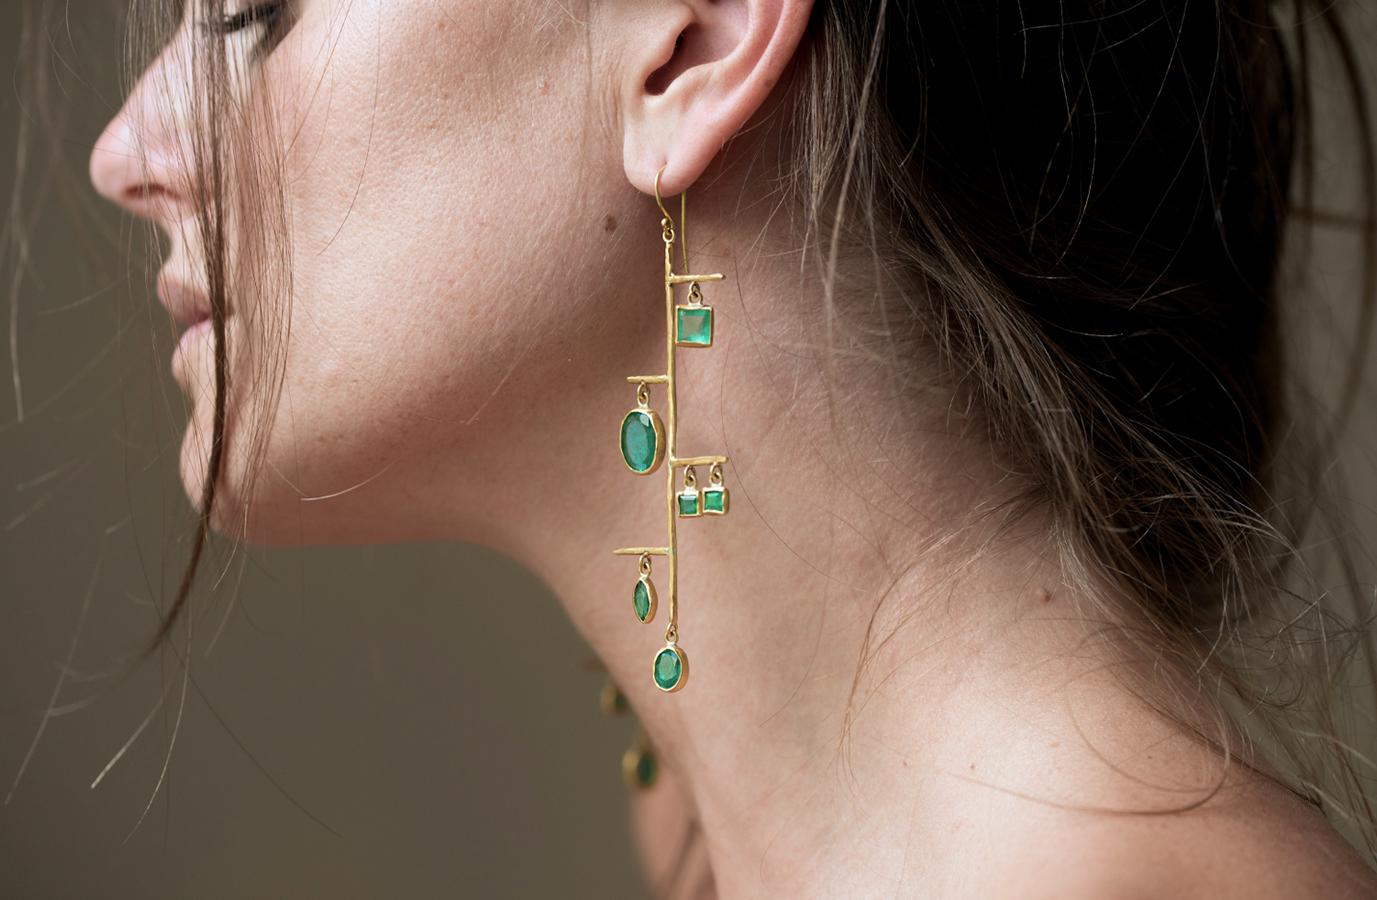 One of a kind, completely hand crafted earrings with over 13 carats of ethically sourced Gemfields' Zambian emeralds.  This pair of artistically designed earrings takes inspiration from mid century modern aesthetic with a very modern approach.  This